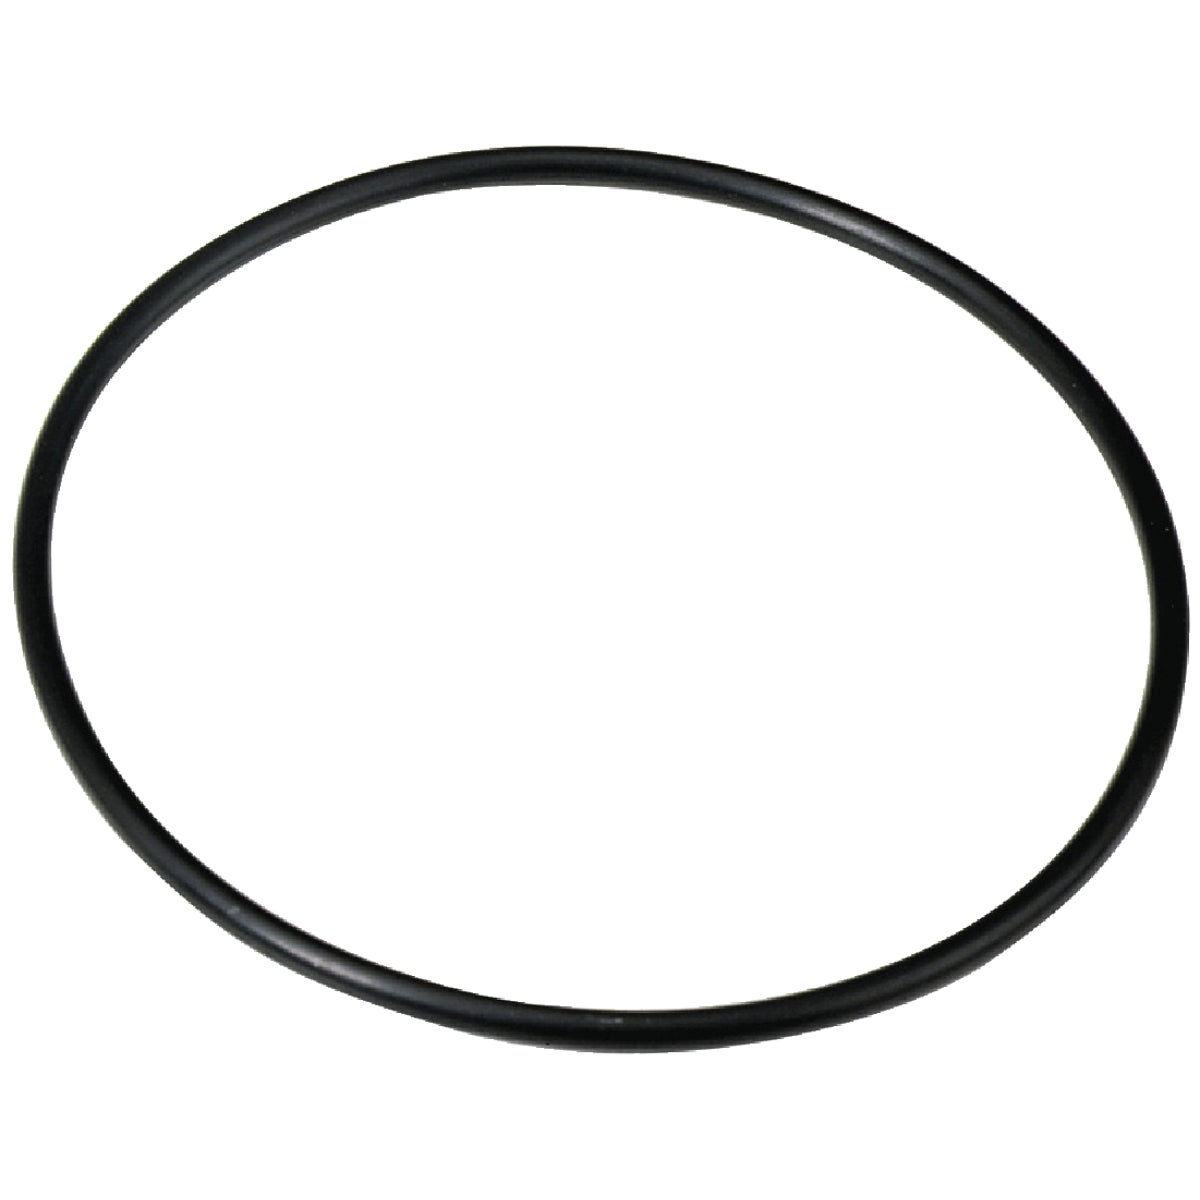 Item 432784, Replacement 0-ring for filter assemblies with 3/8" inlet/outlet.